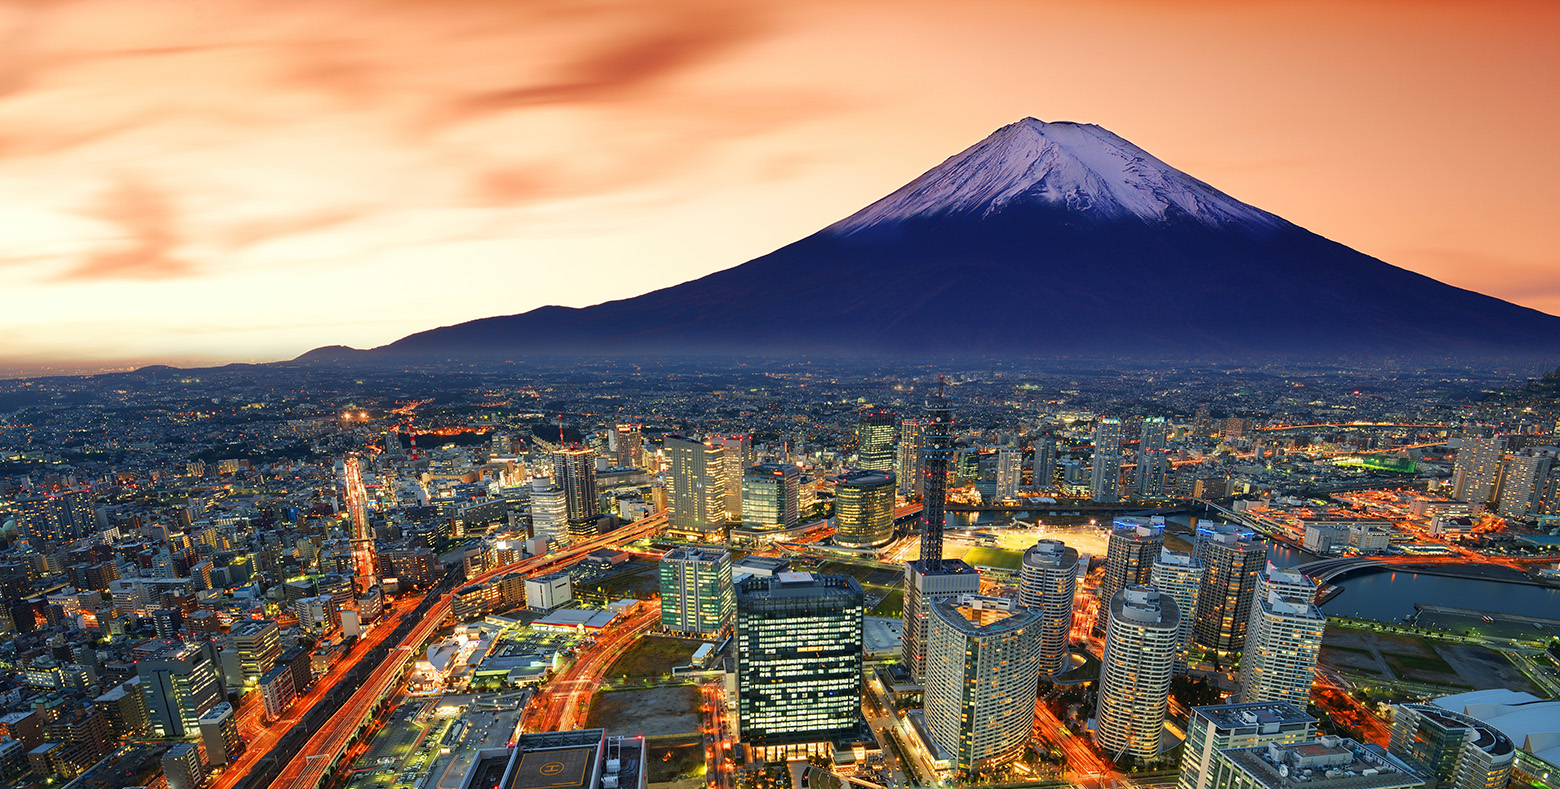 Skyline Tokyo with Mount Fuji in background